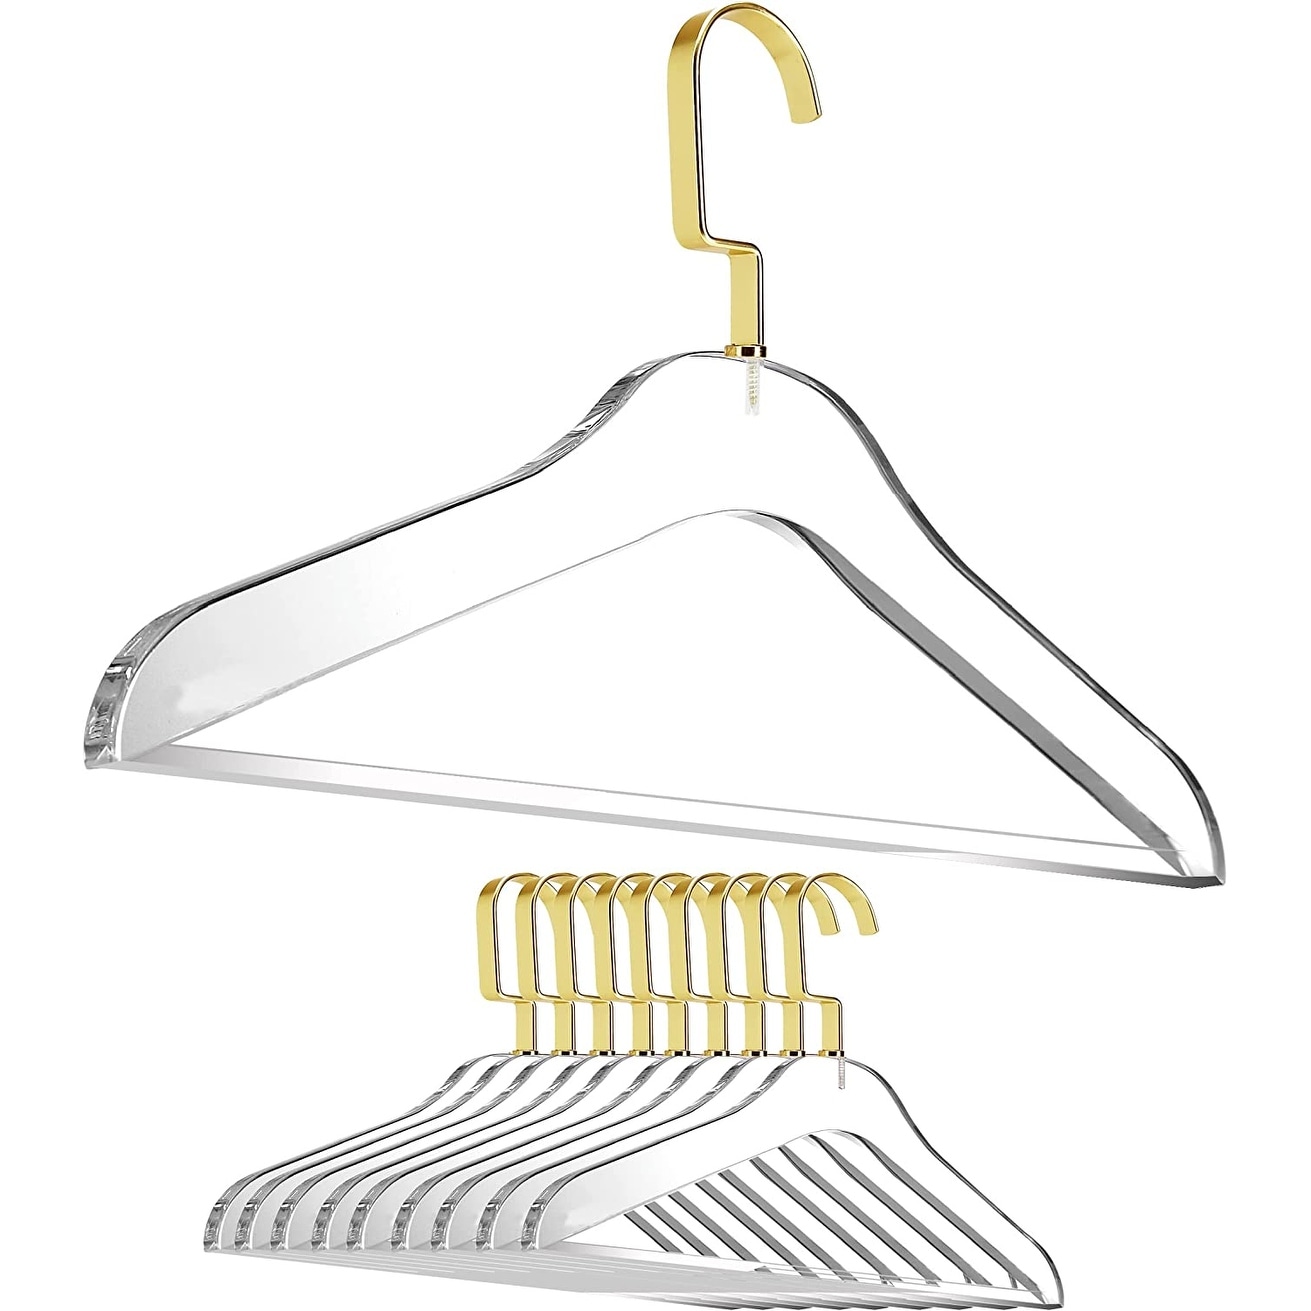 https://ak1.ostkcdn.com/images/products/is/images/direct/4f7ea63d9c78e7d05a4b47e218beeefcaa376202/DesignStyles-Clear-Acrylic-Clothes-Hangers-w-Pants-Bar---10-Pk.jpg